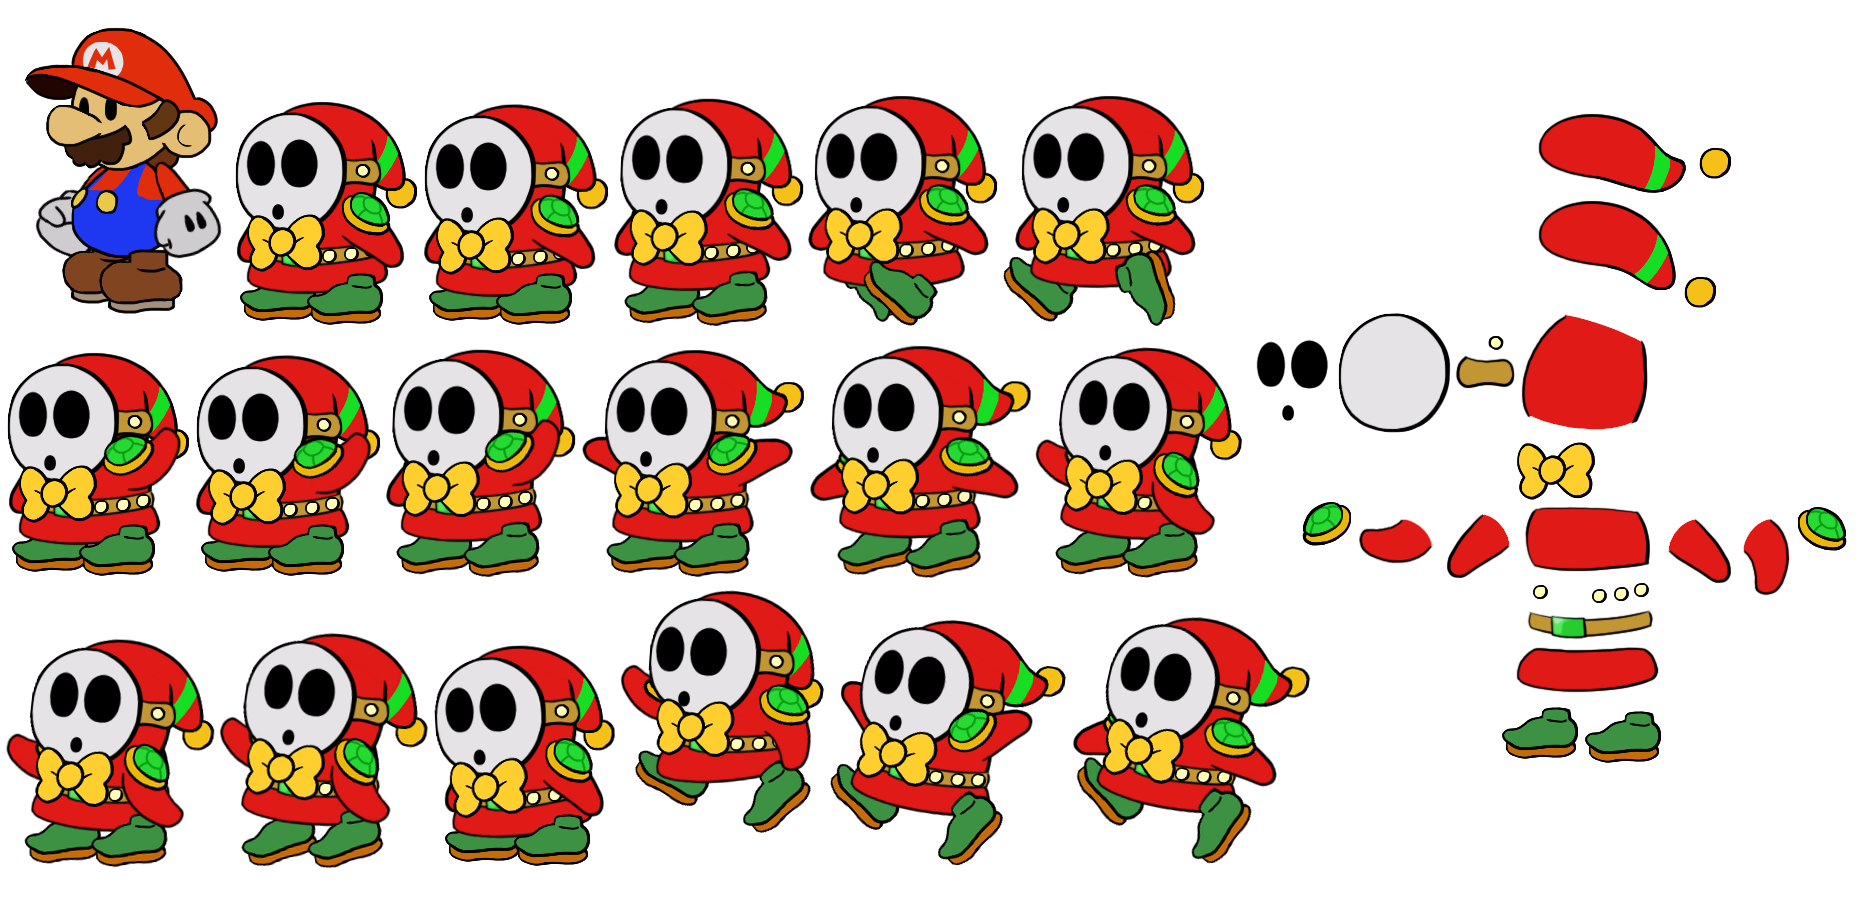 Emcee Shy Guy (Paper Mario-Style, Classic)